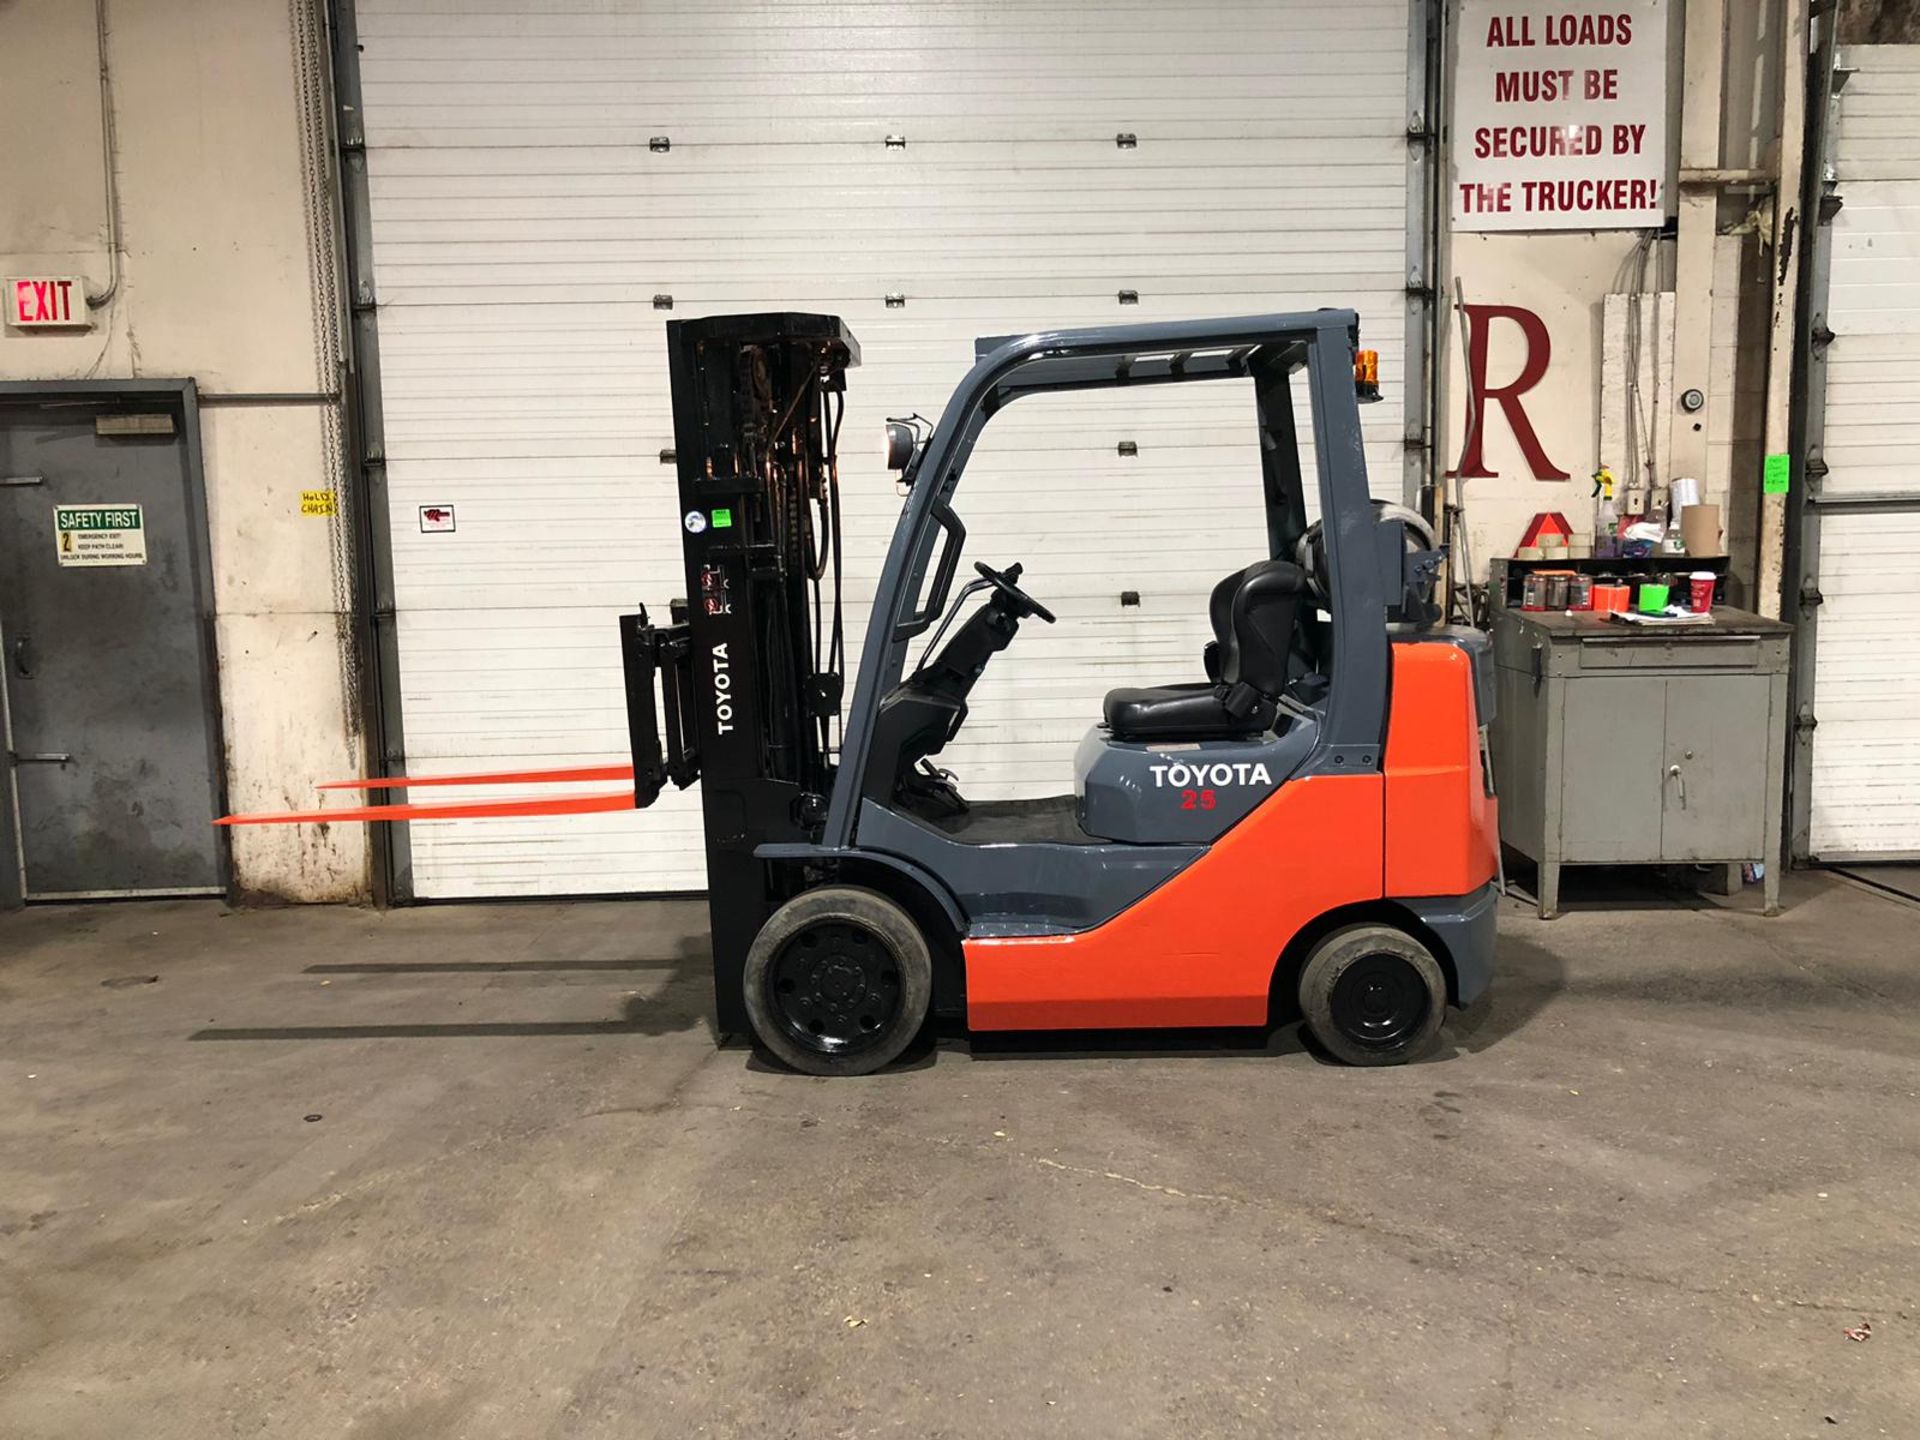 2007 Toyota 5,000lbs Capacity LPG (Propane) Forklift with sideshift and 4-STAGE MAST (no propane